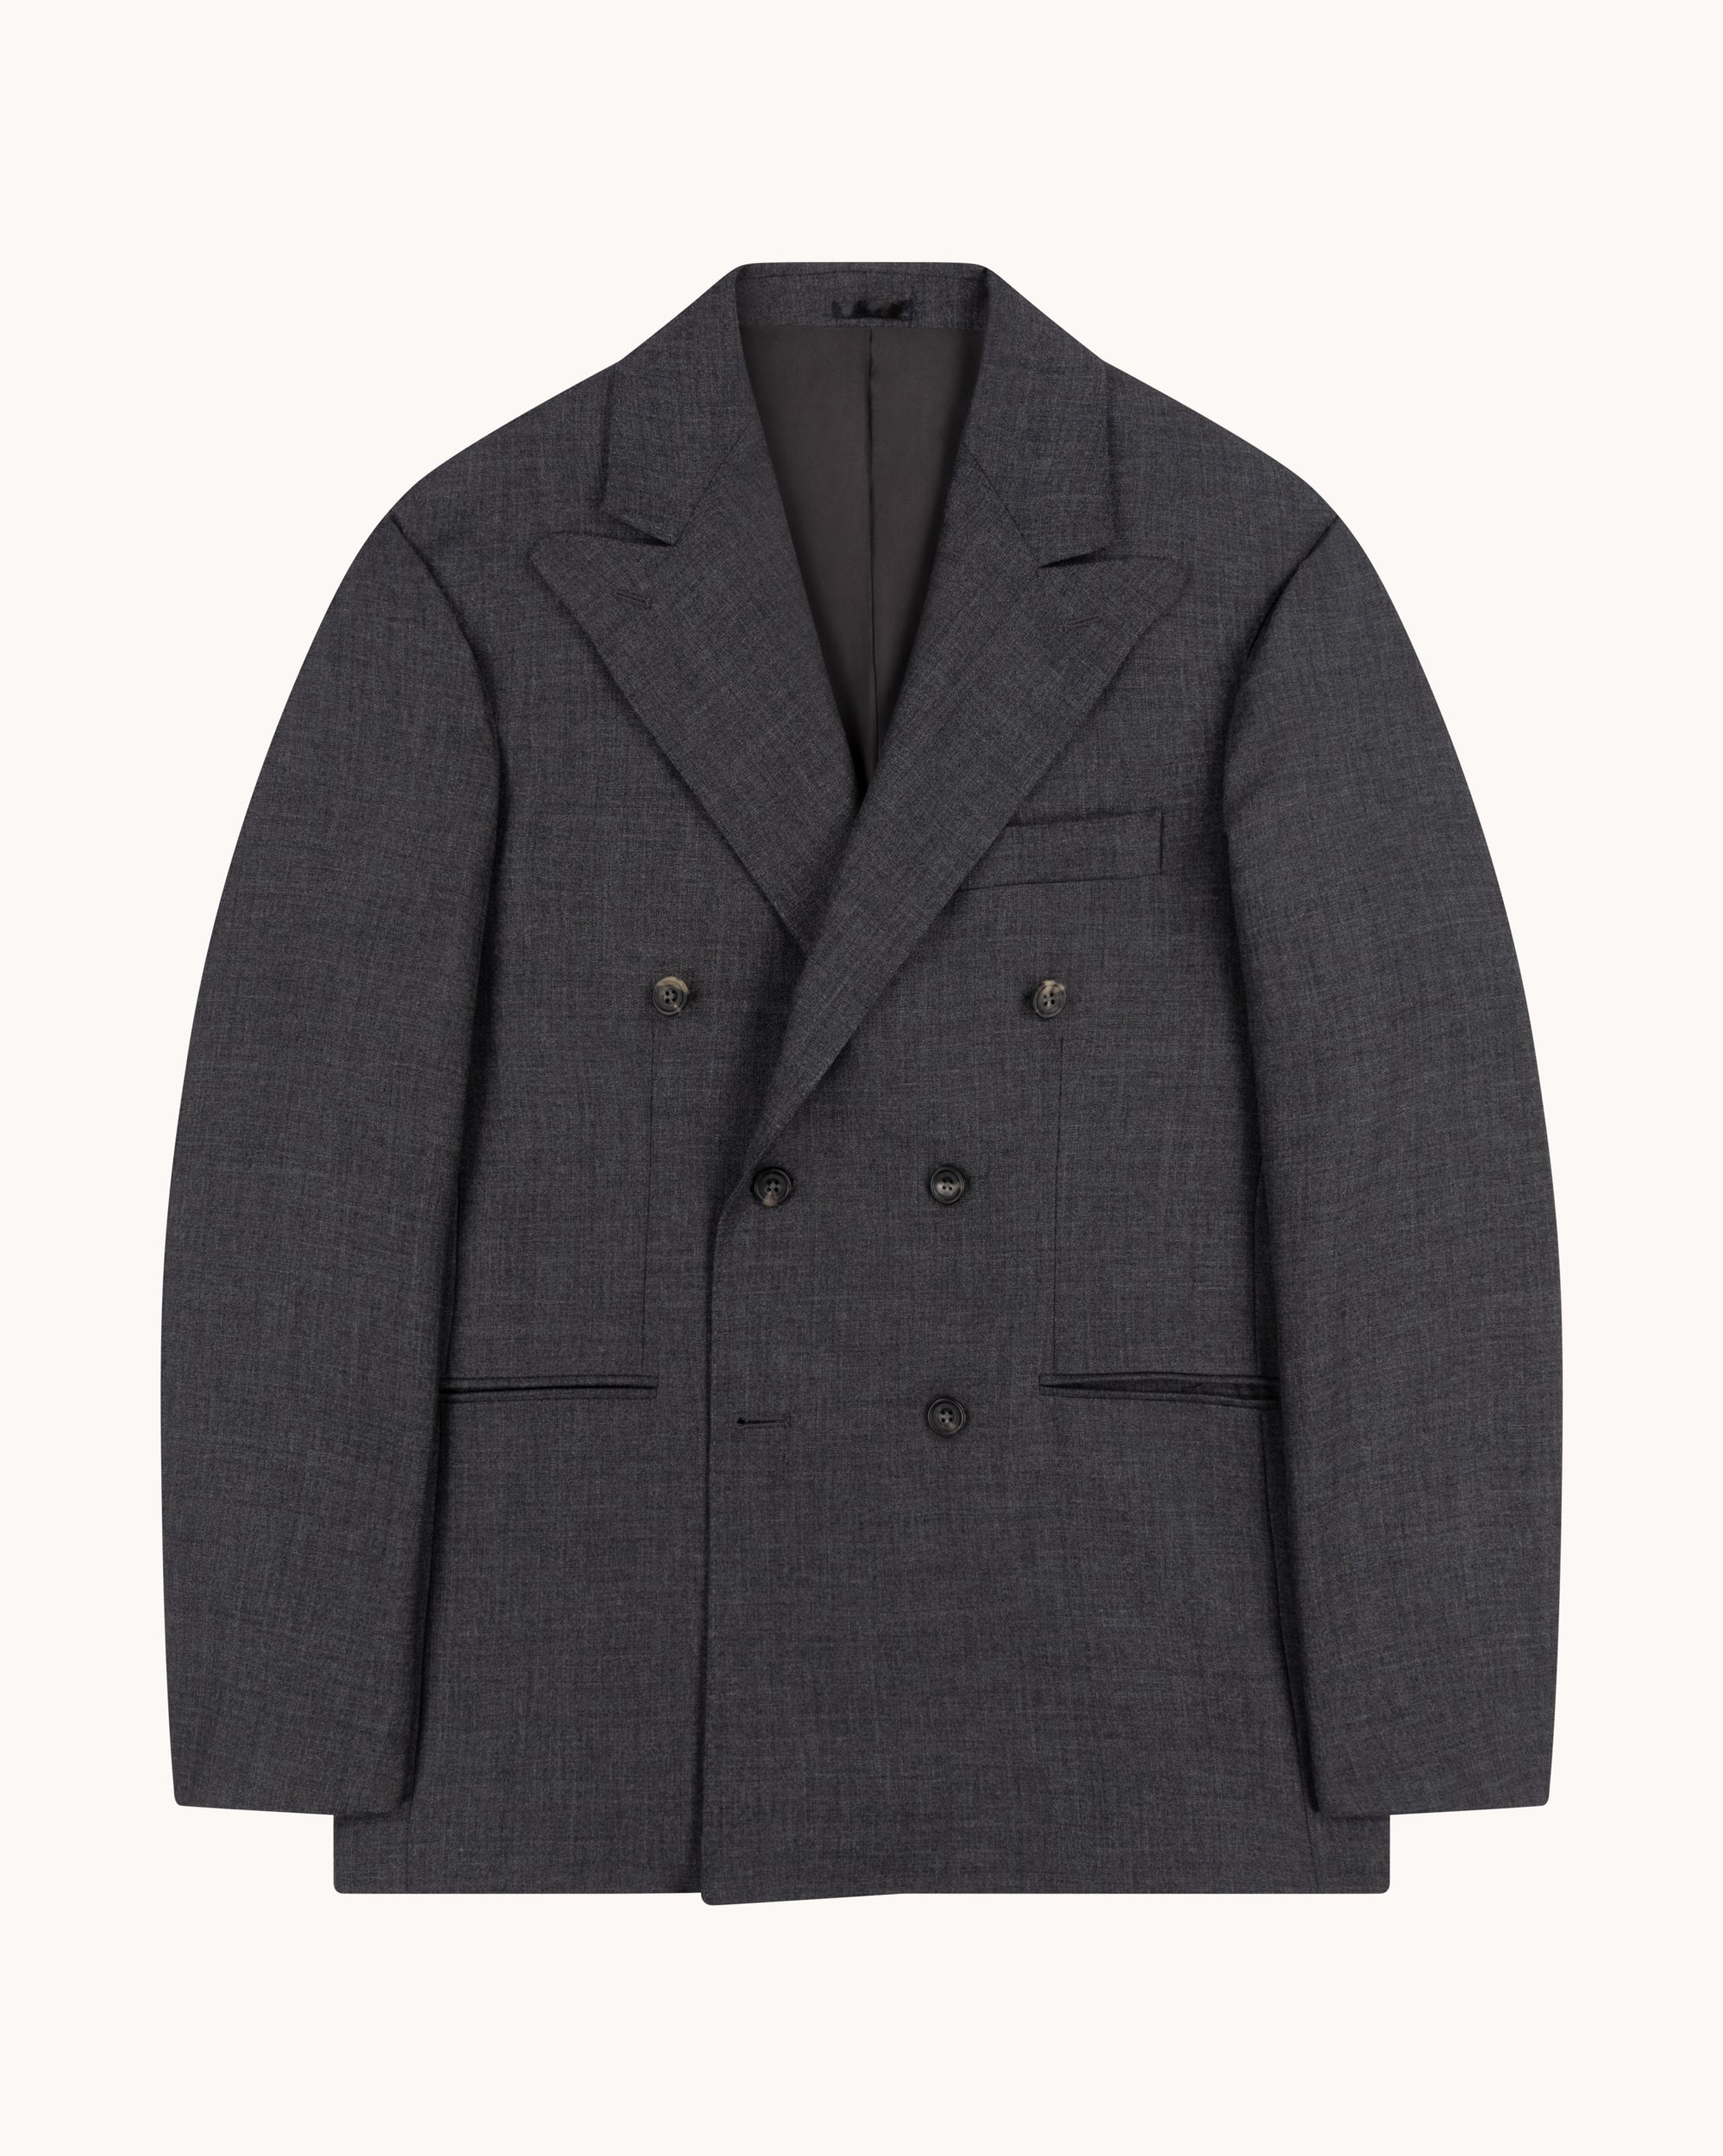 Double Breasted Sport Jacket - Charcoal Tropical Wool